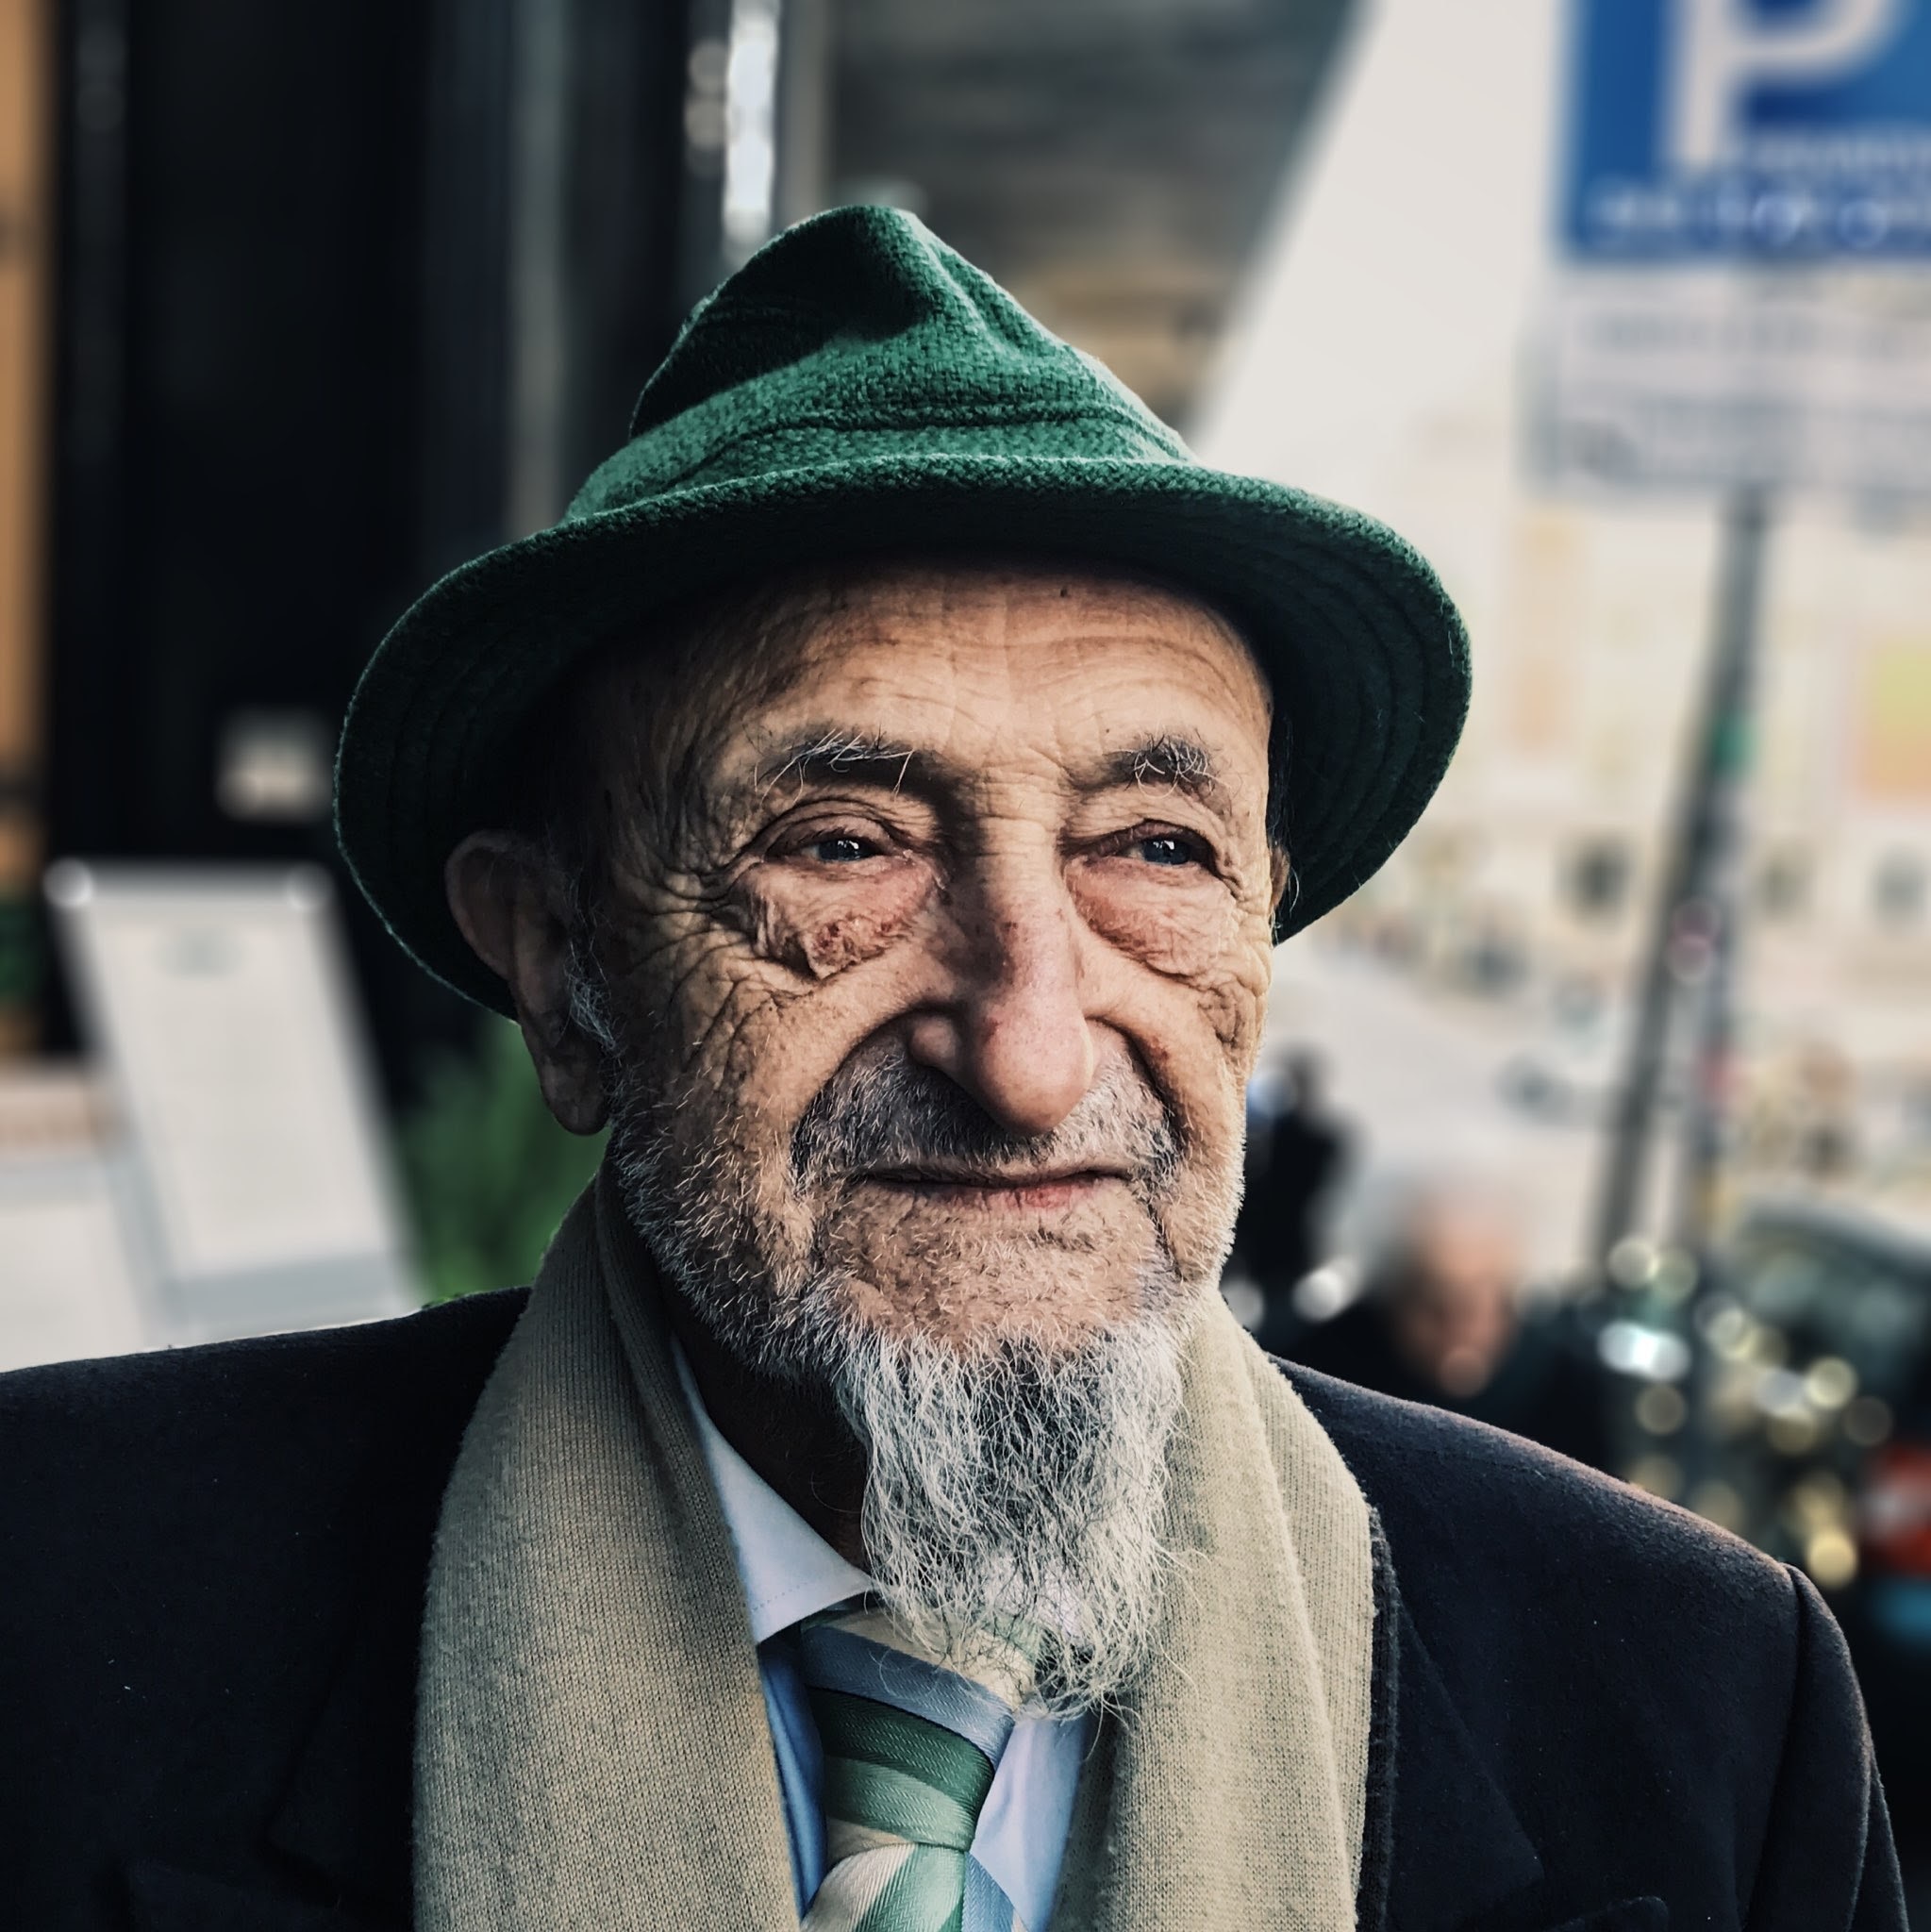 man wearing green cap and brown scarf